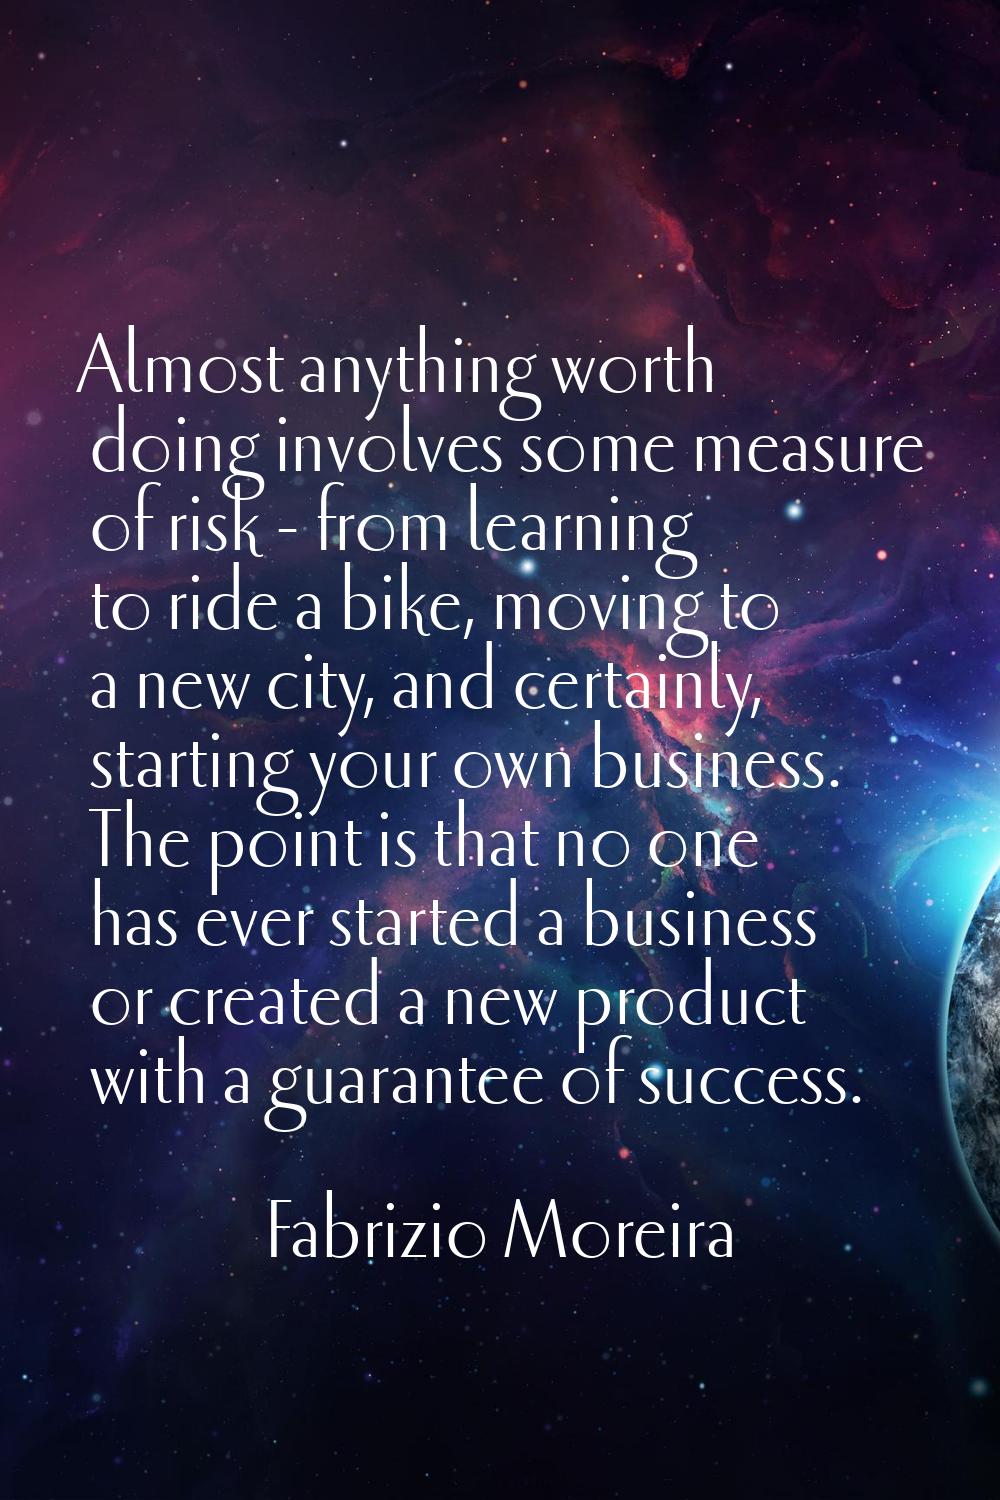 Almost anything worth doing involves some measure of risk - from learning to ride a bike, moving to